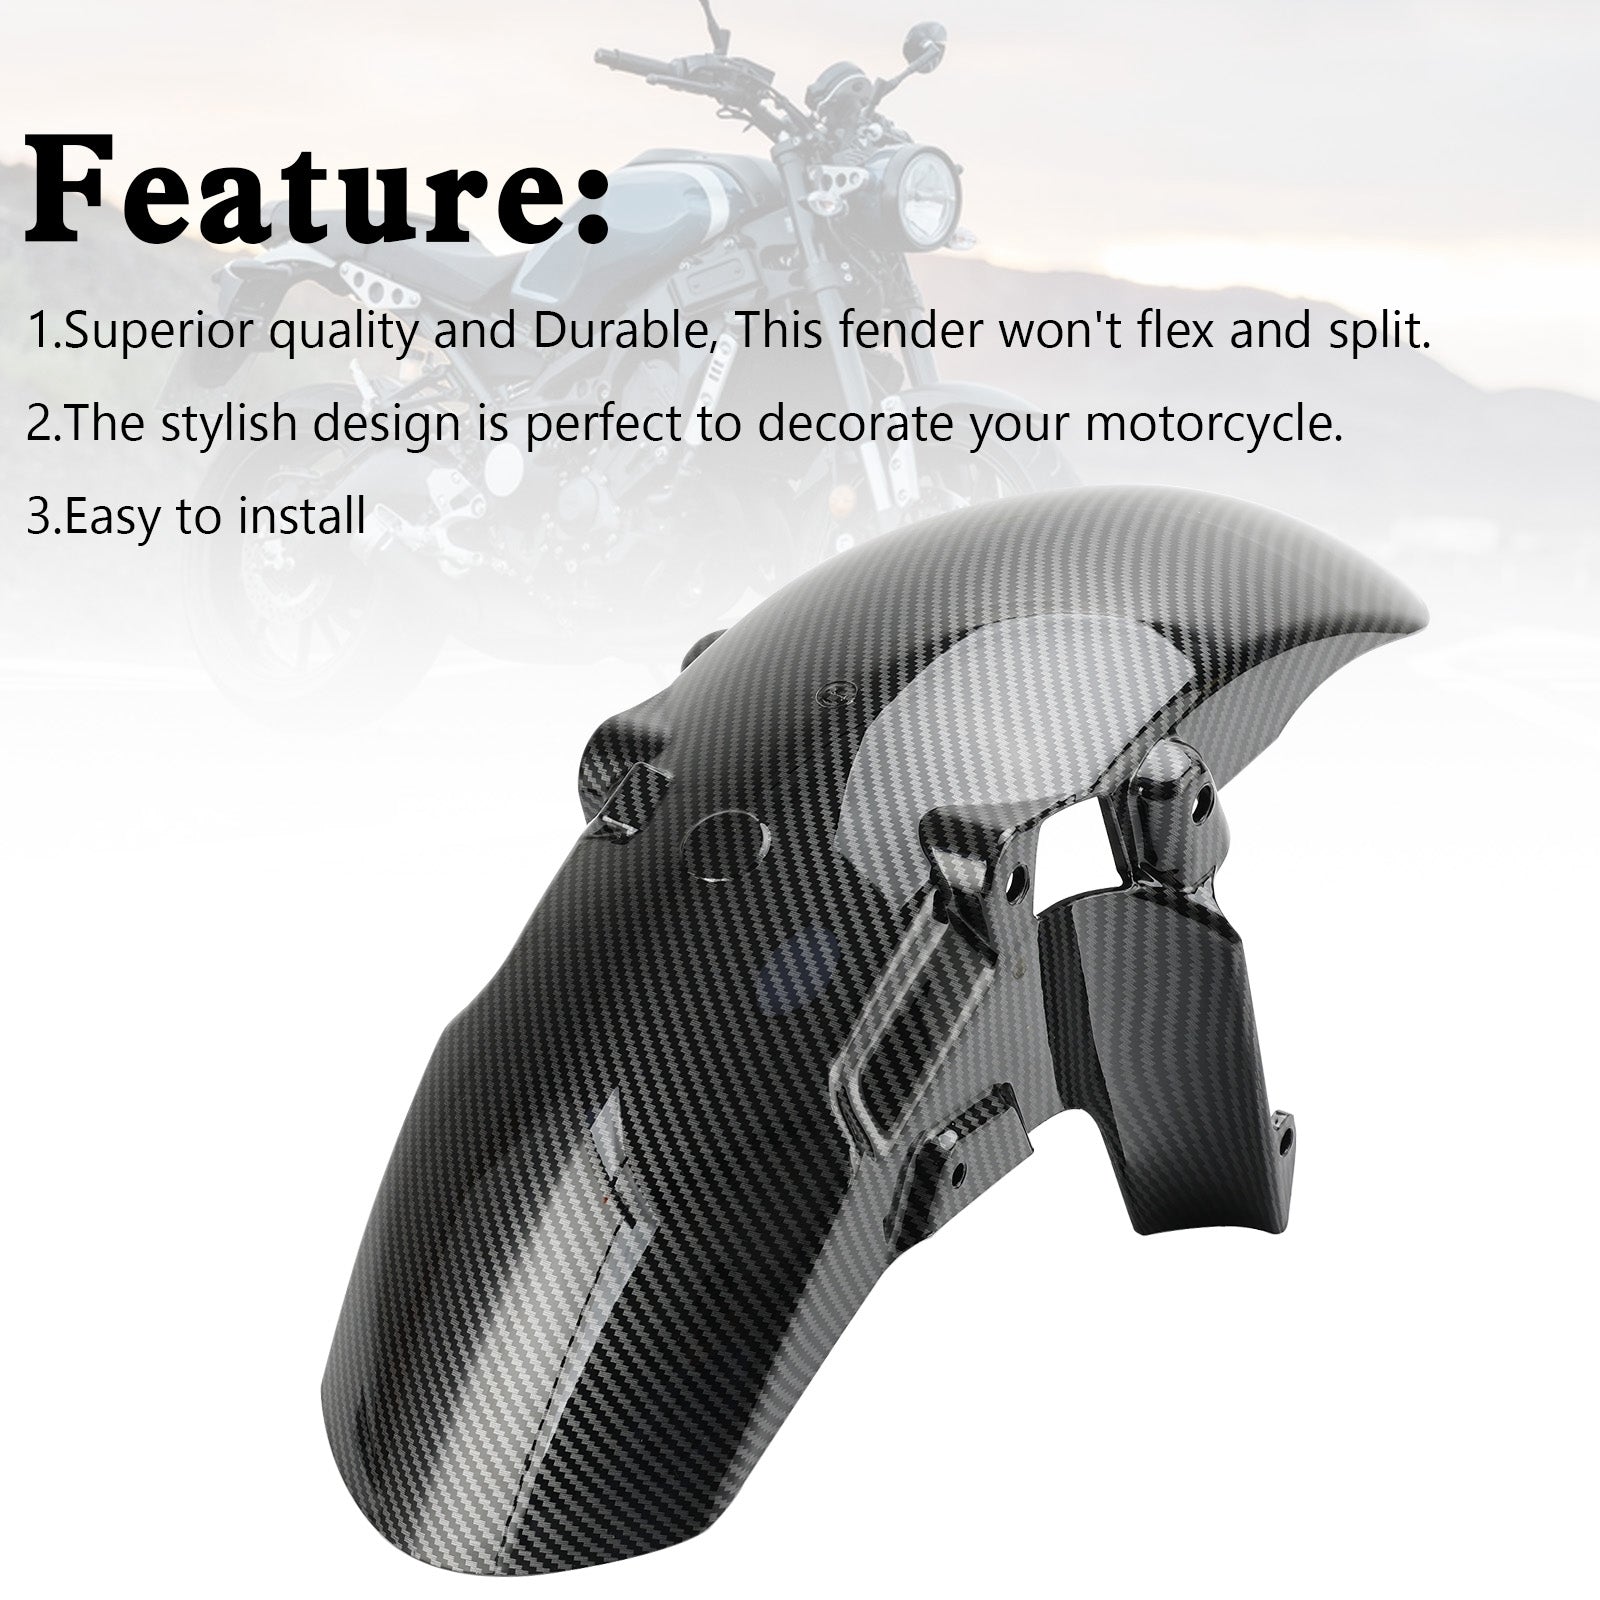 ABS plastic Front Fender Mudguard Fairing For Yamaha XSR 900 2016-2021